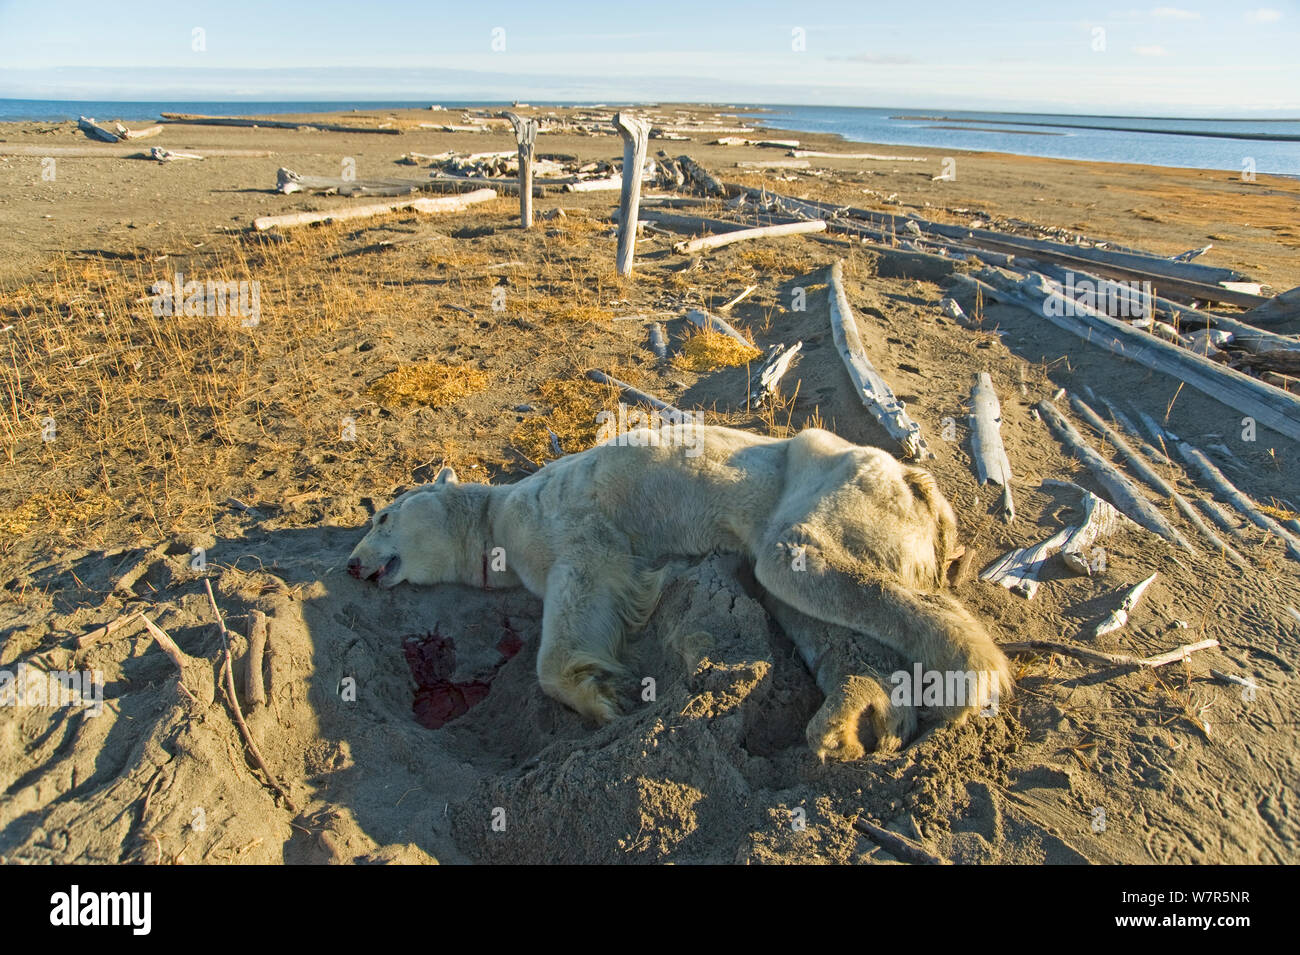 Polar bear (Ursus maritimus) deceased male found along a barrier island in autumn, Beaufort Sea, off the 1002 area of the Arctic National Wildlife Refuge, North Slope, Alaska. The bear was thin and probably died of starvation. Stock Photo